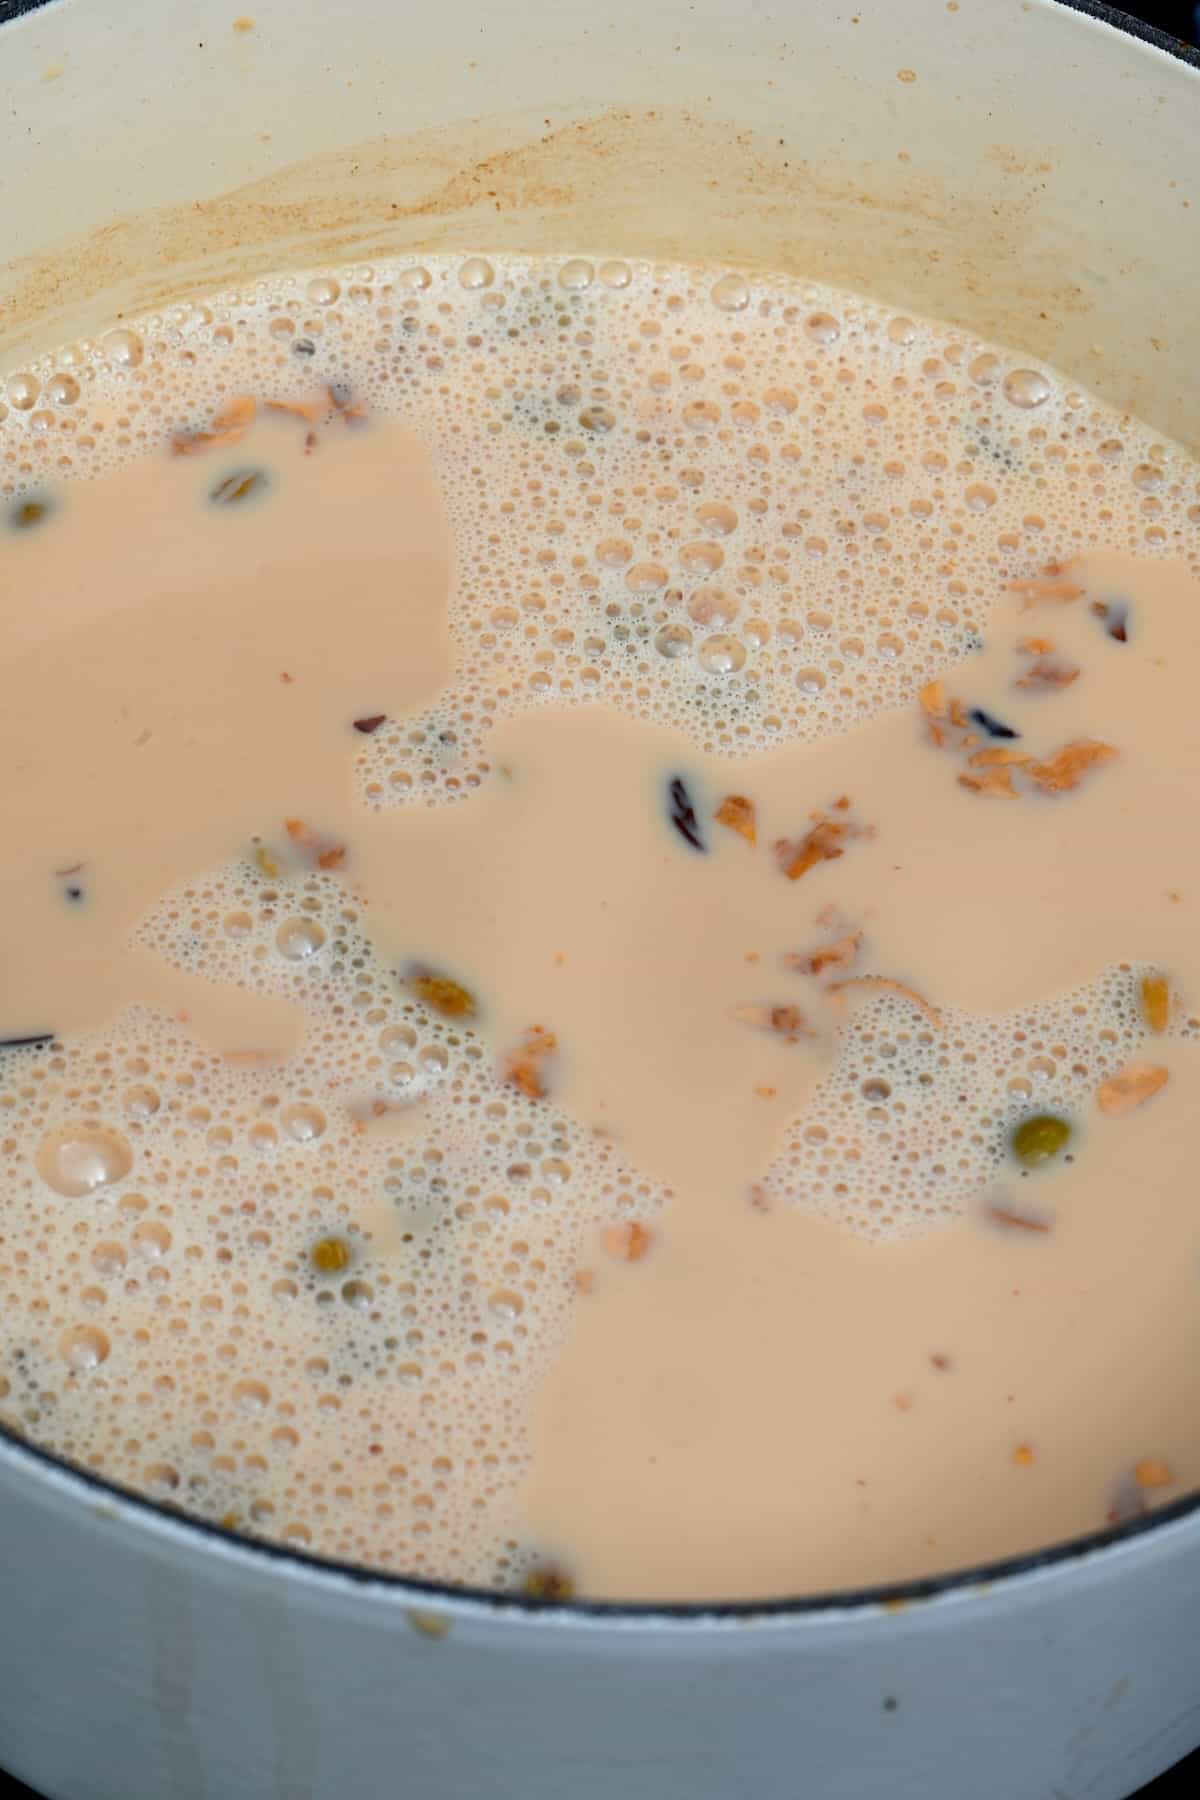 Milk added to black tea mixture with spices